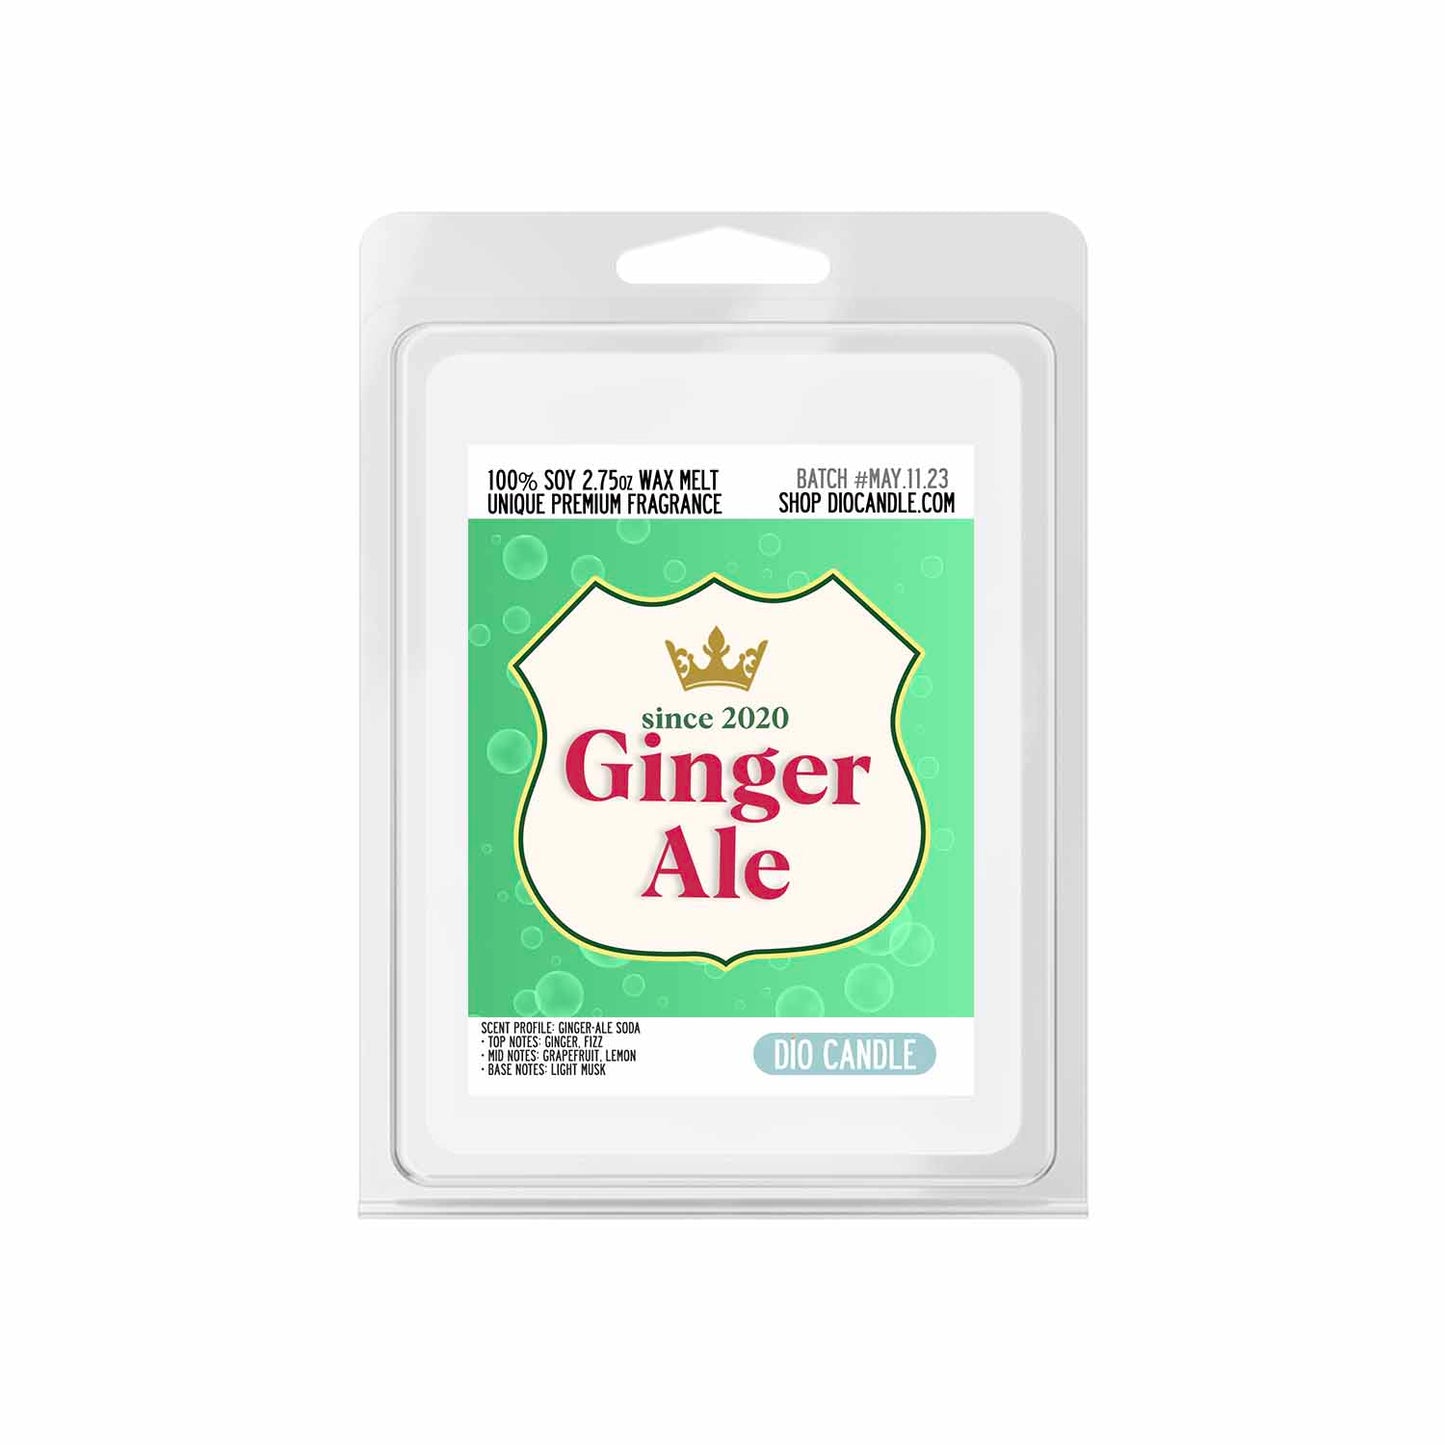 Ginger Ale Soda Candle